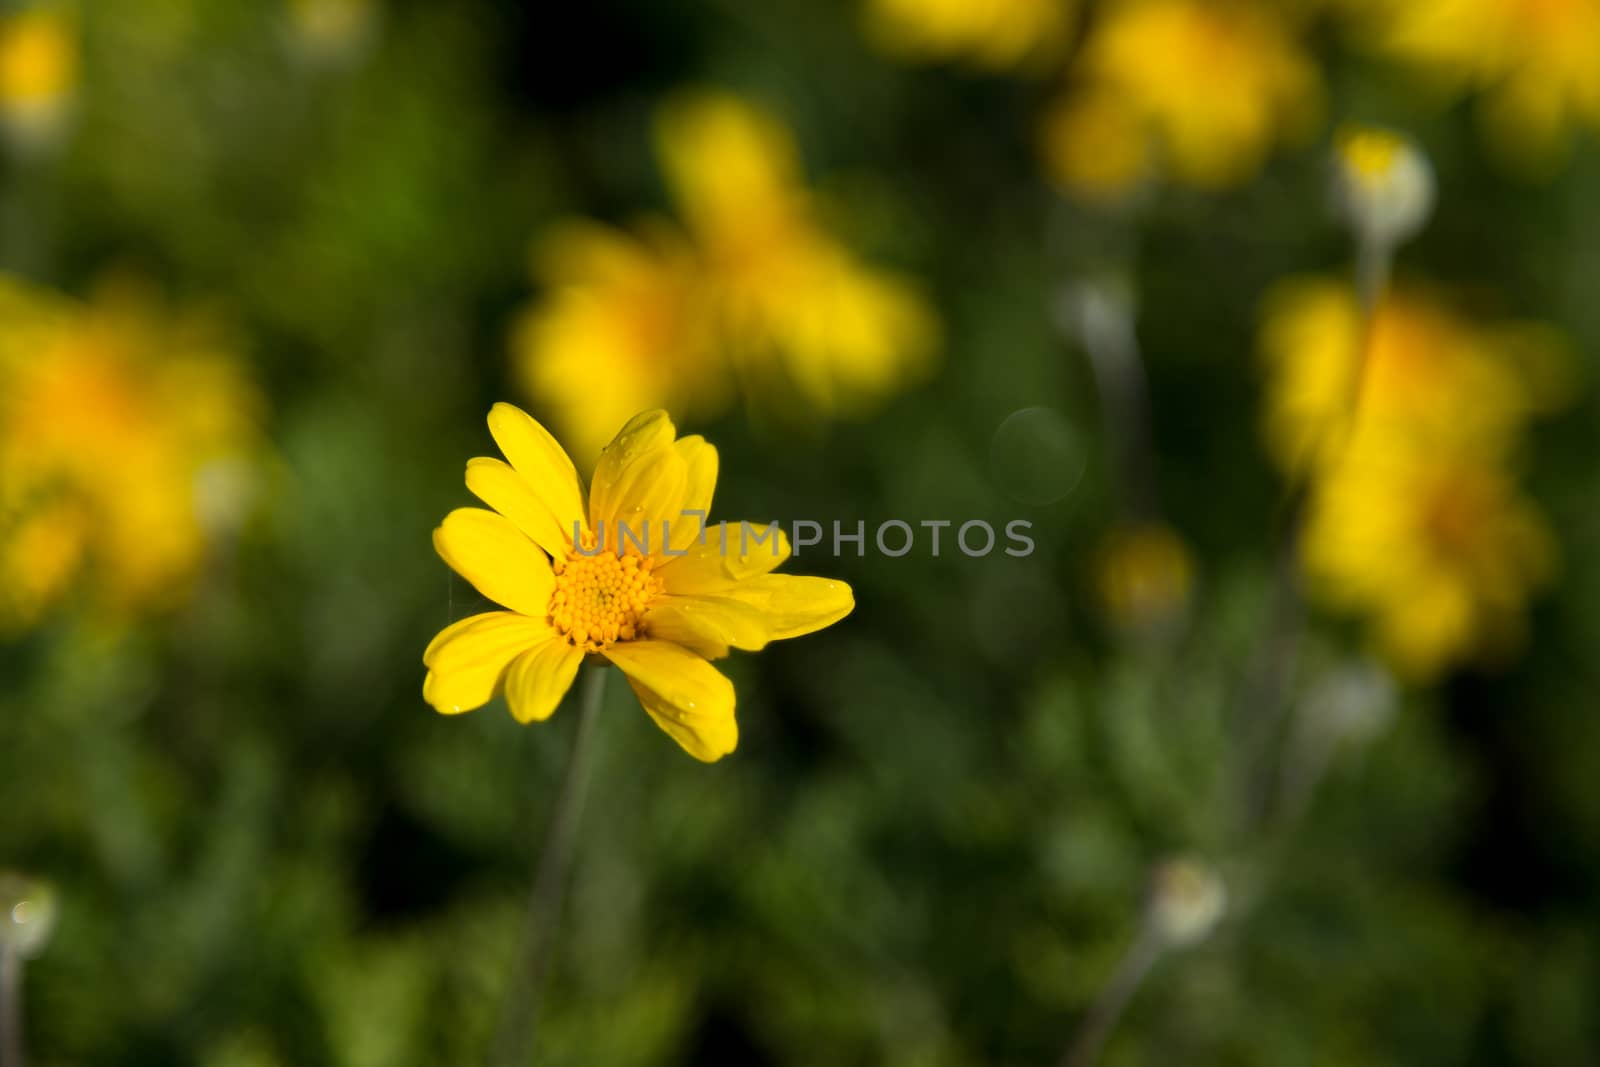 A little yellow flowers with green leaves